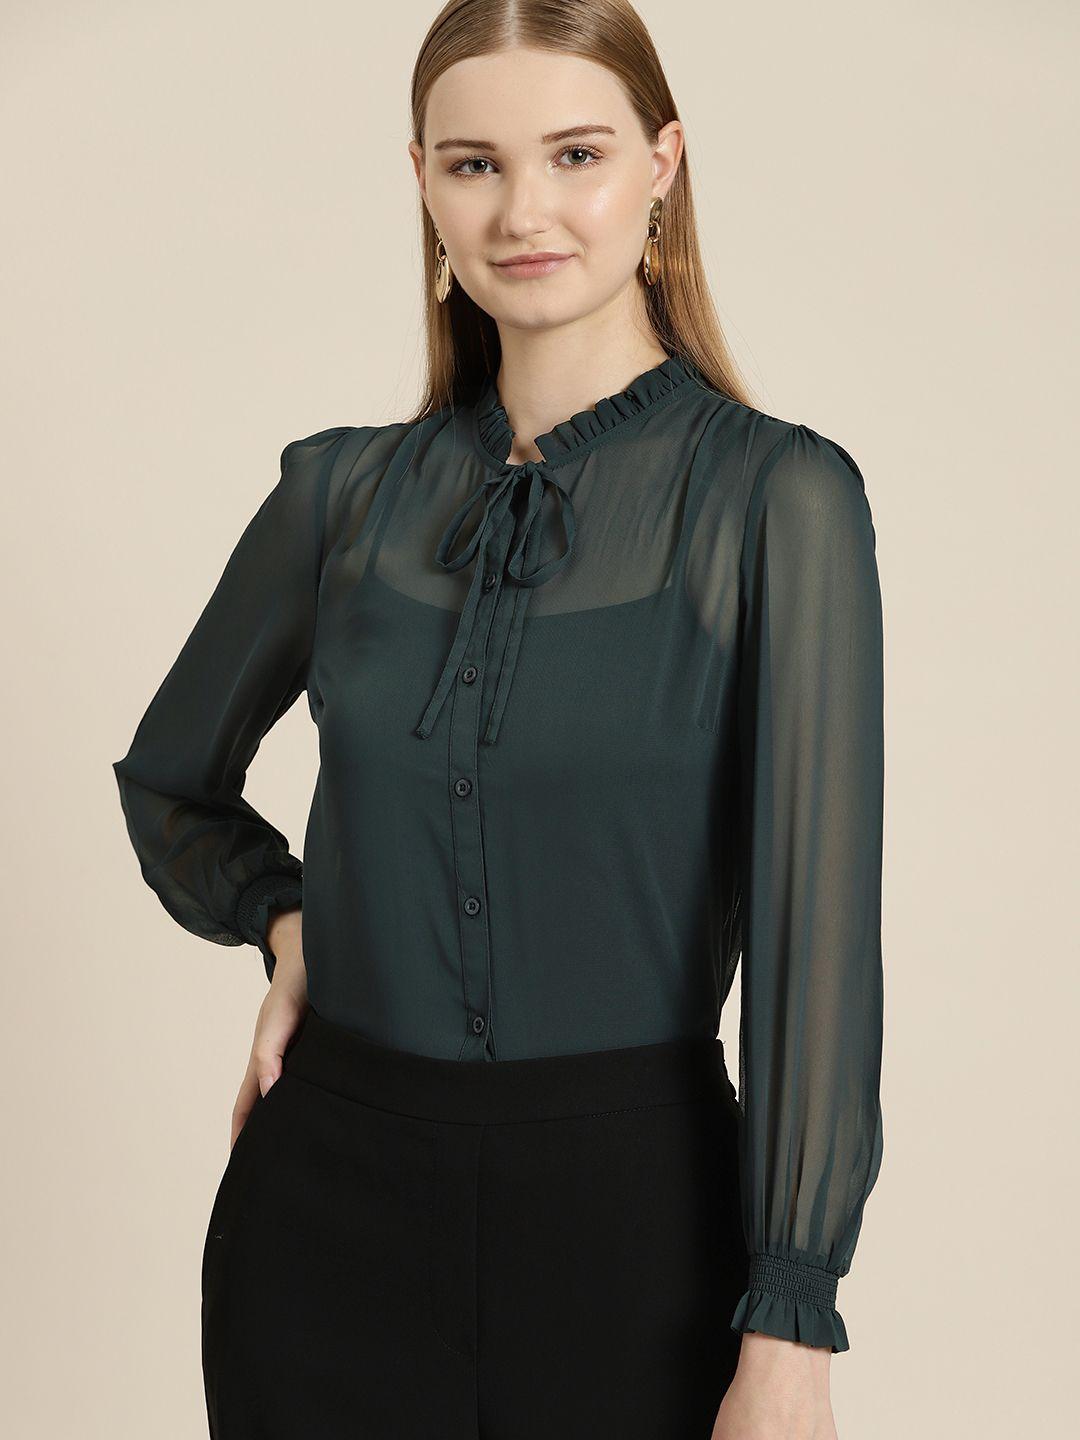 her by invictus tie-up neck puff sleeve sheer shirt style top